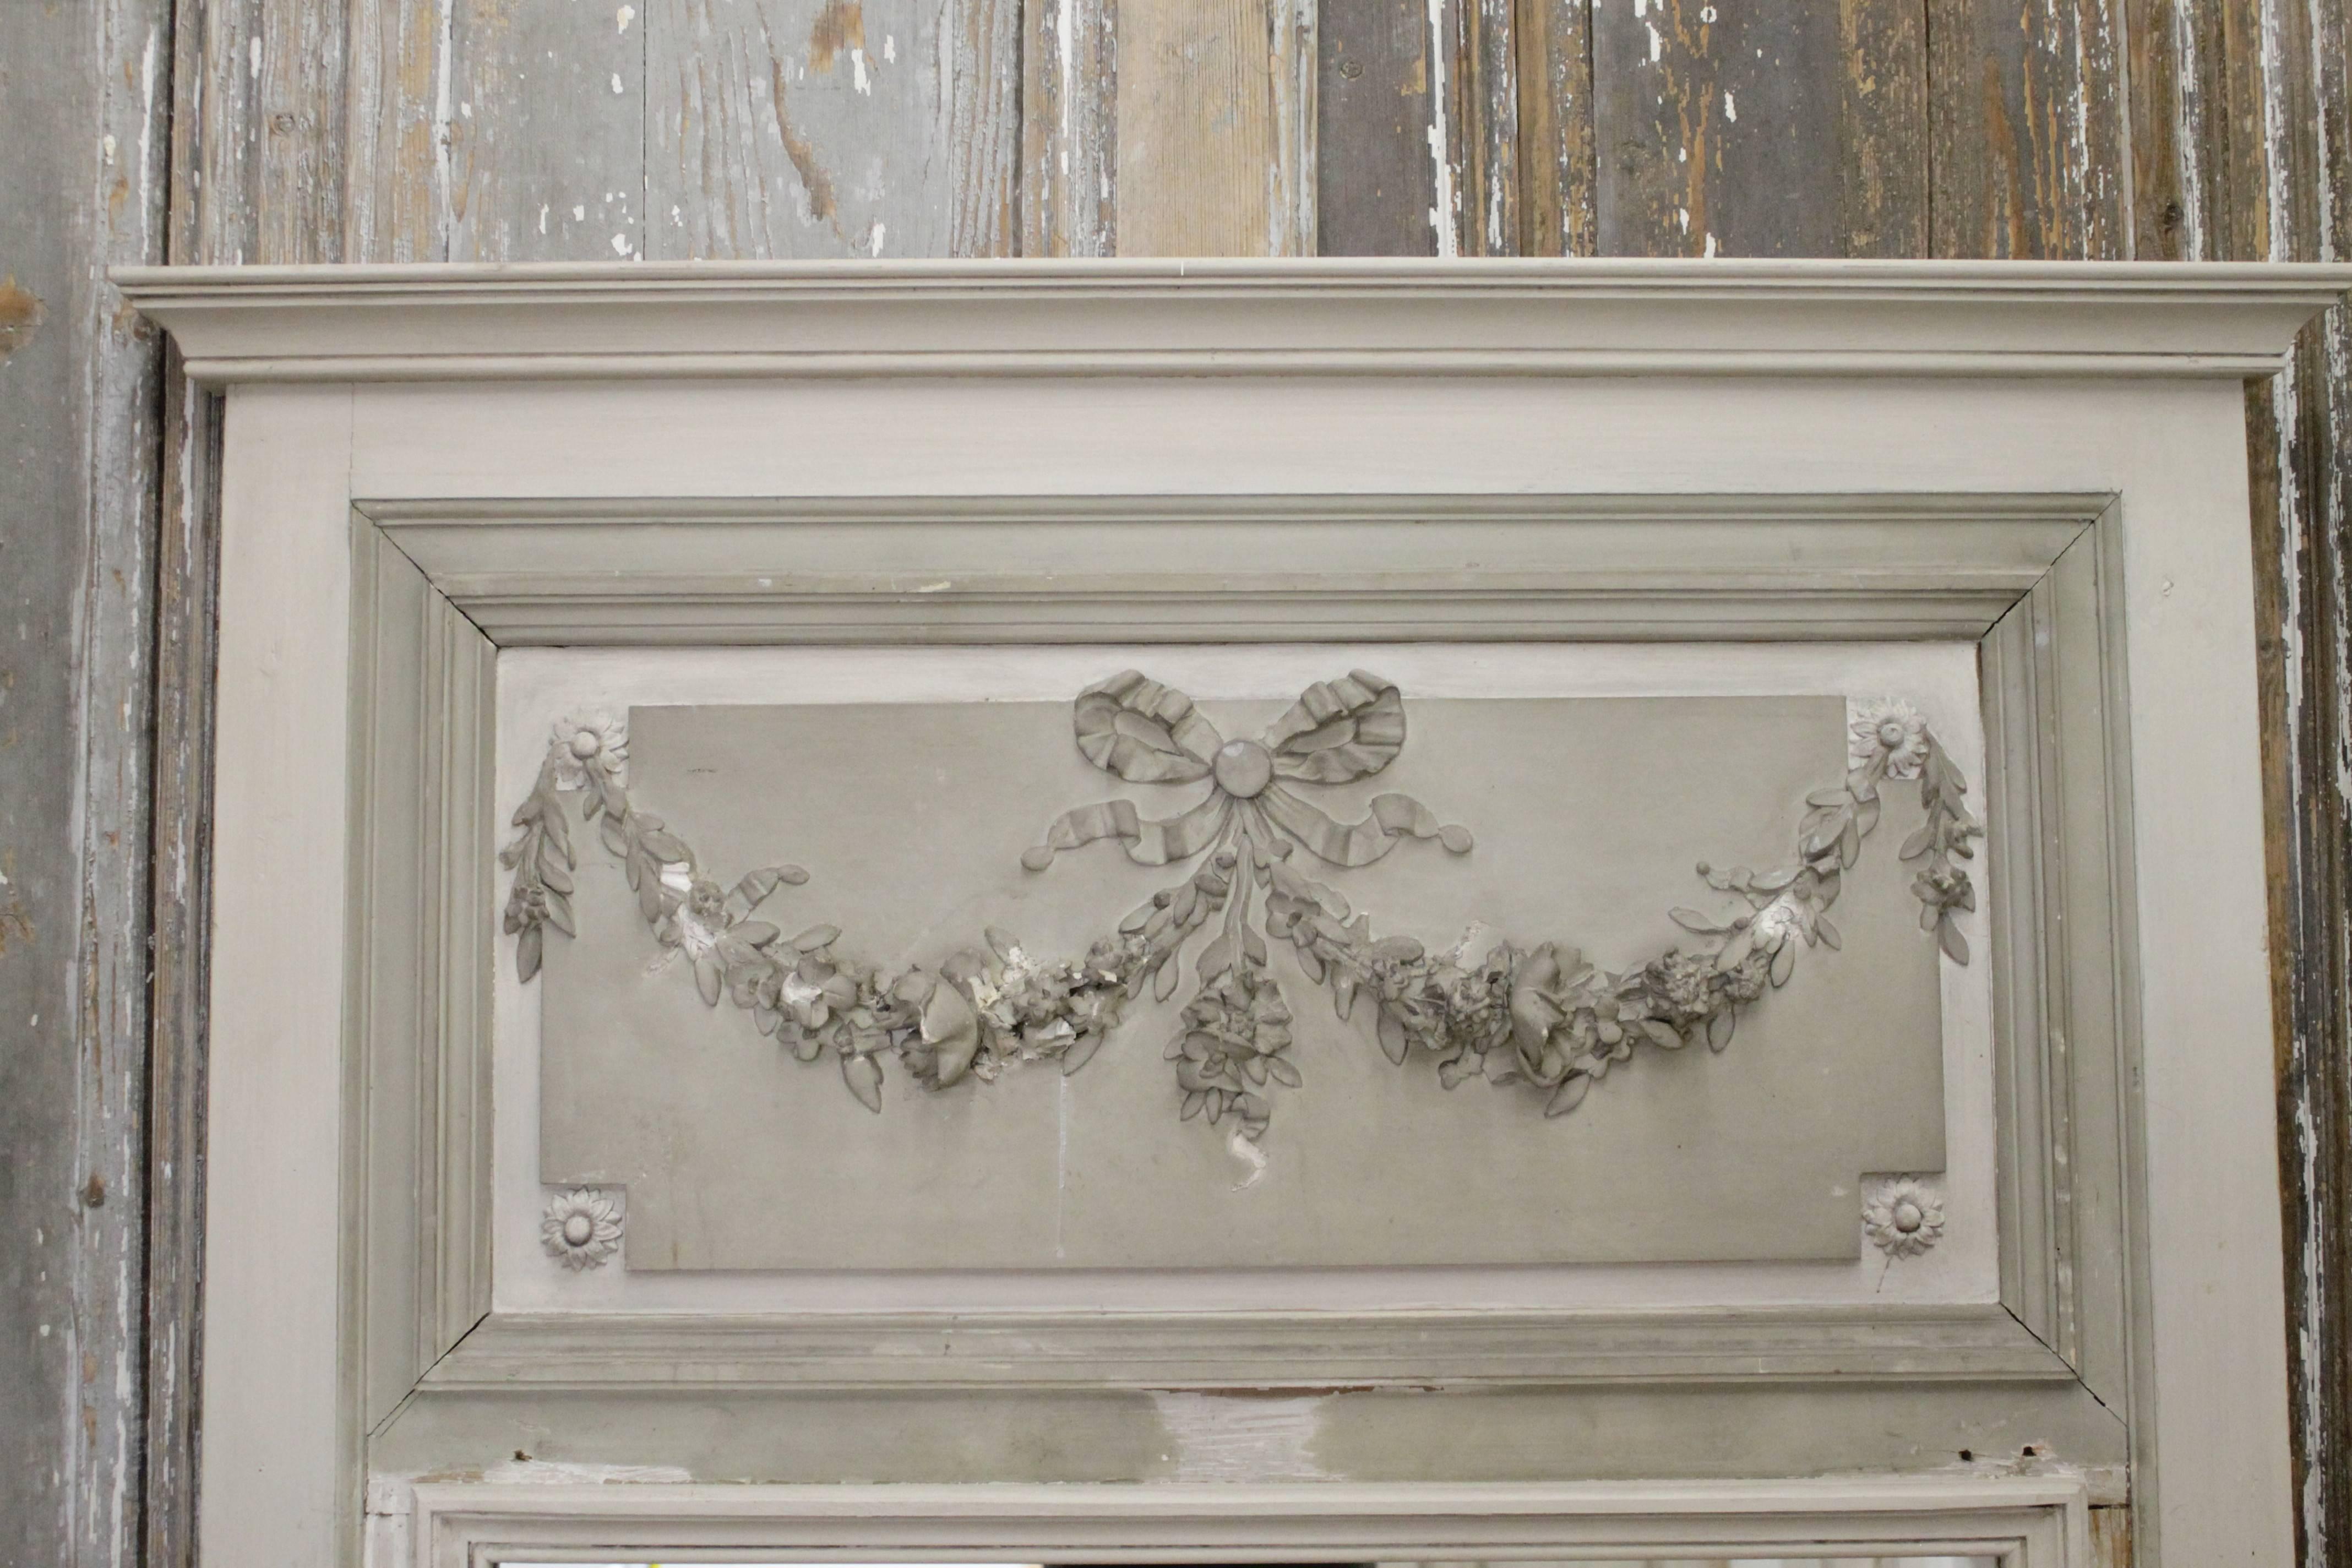 Intricate roses carvings and original French grey green paint. We added a mirror and crown molding to this frame wall panel,
circa 1920.